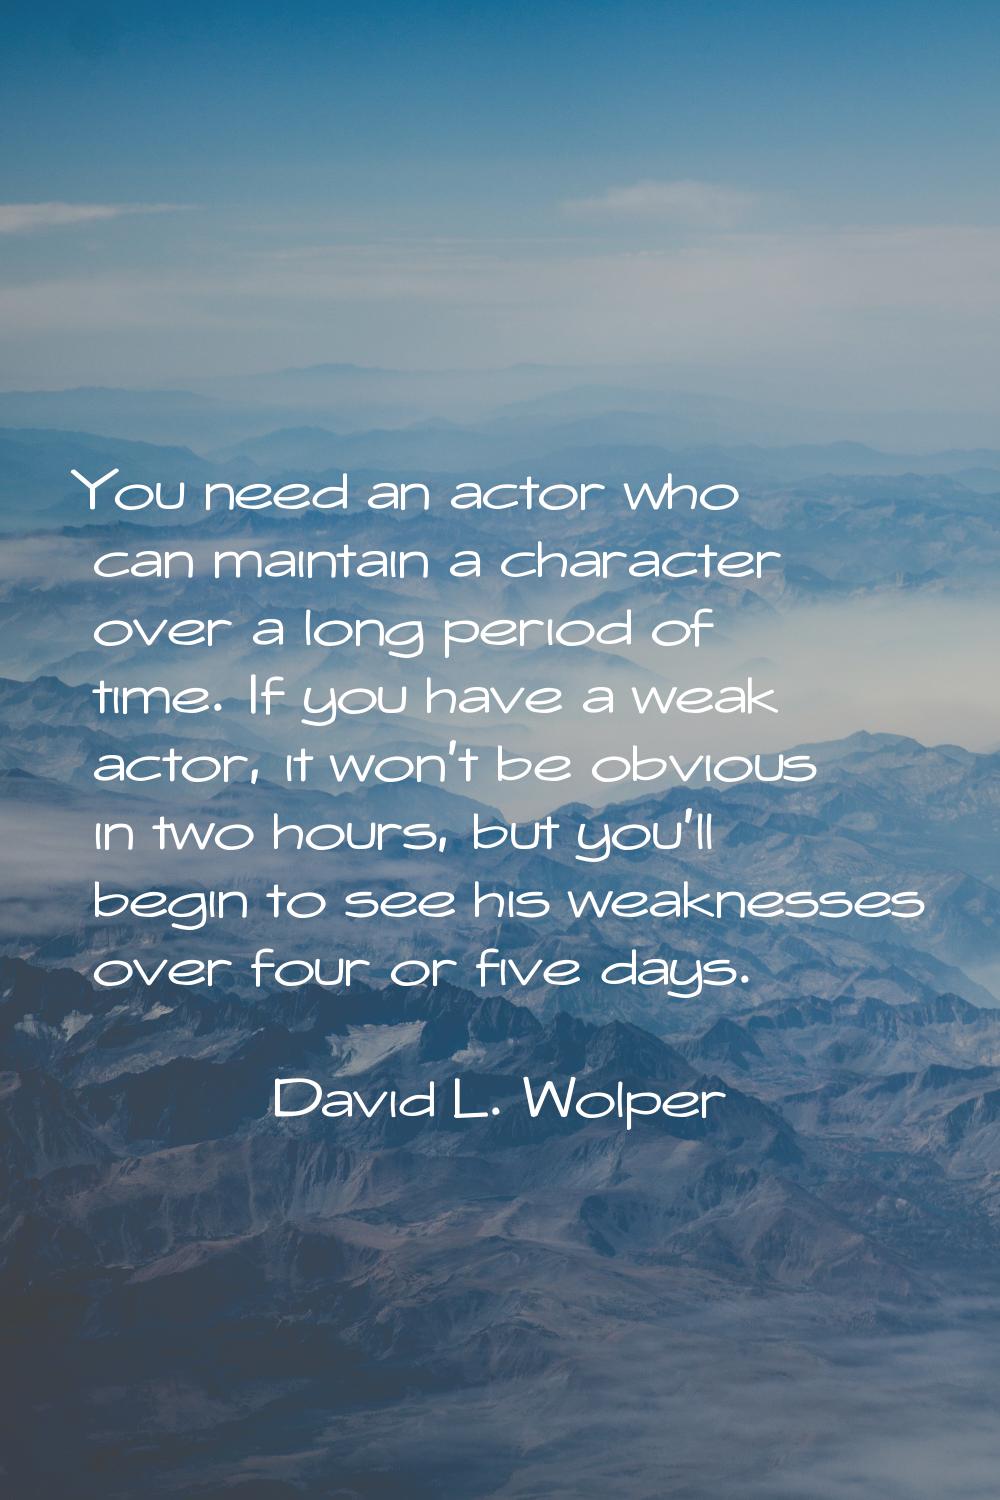 You need an actor who can maintain a character over a long period of time. If you have a weak actor